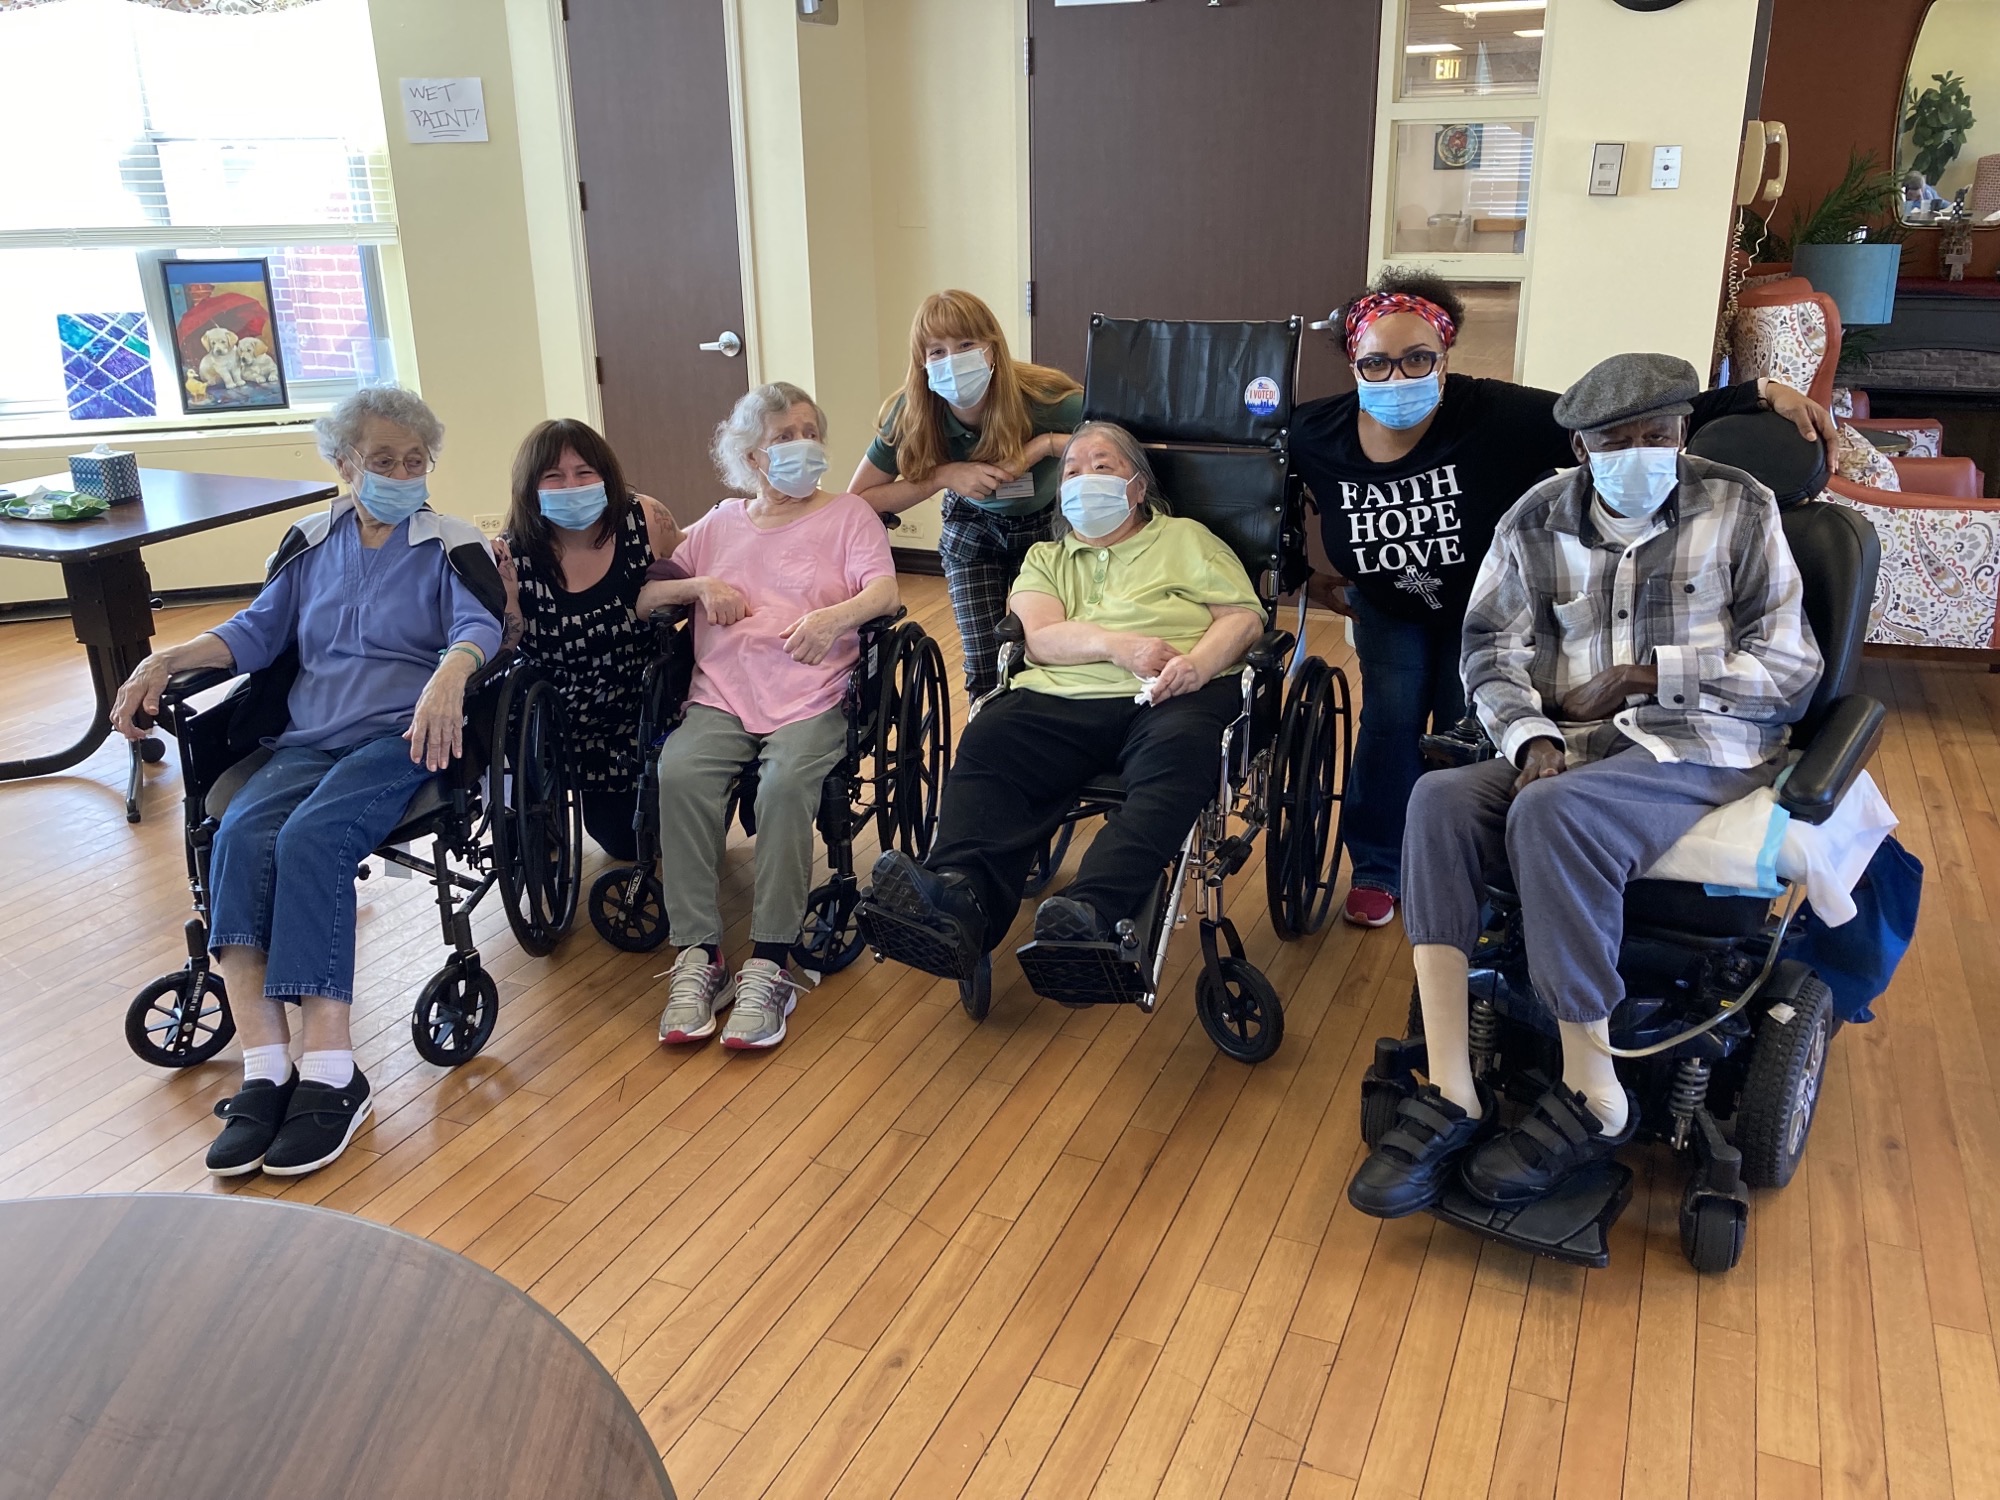 A group of seniors and their caregivers sit for a photo-op inside a care facility. All the seniors are seated in wheel chairs or motorized chairs. All people in the photo are wearing blue face masks.